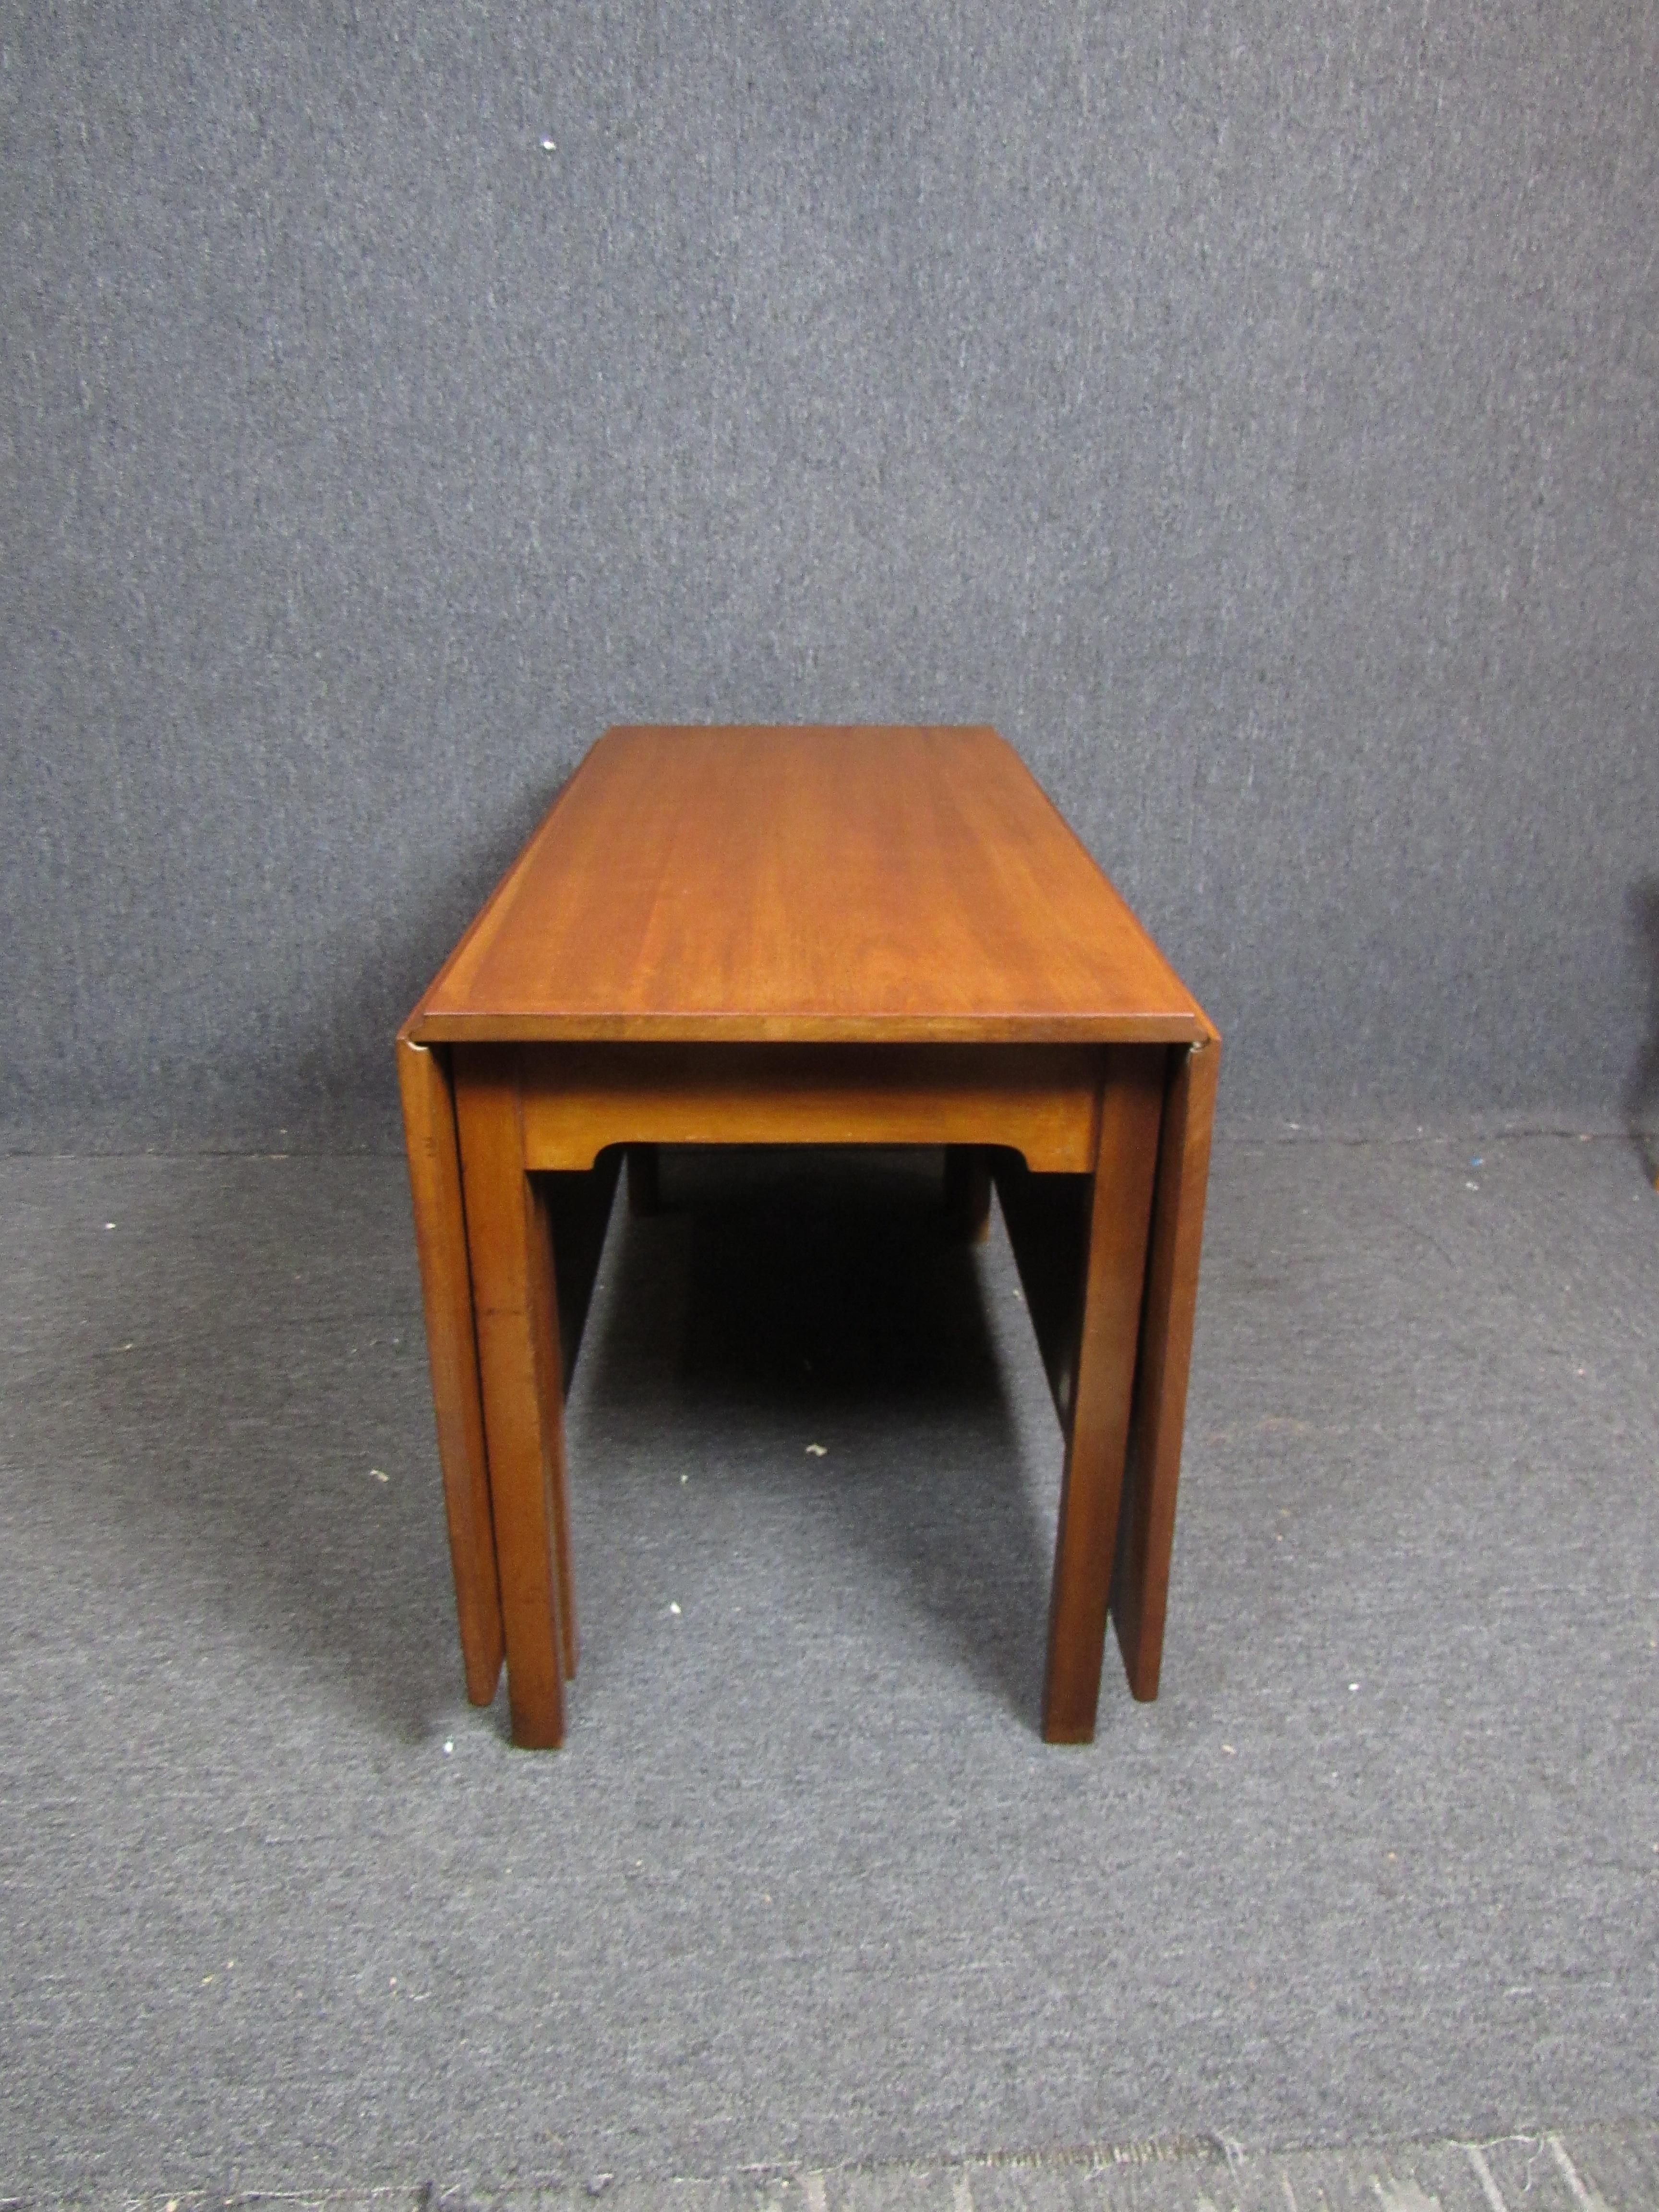 Wonderful mid-century dining table with large drop leaves for ample seating. Measures 67.5